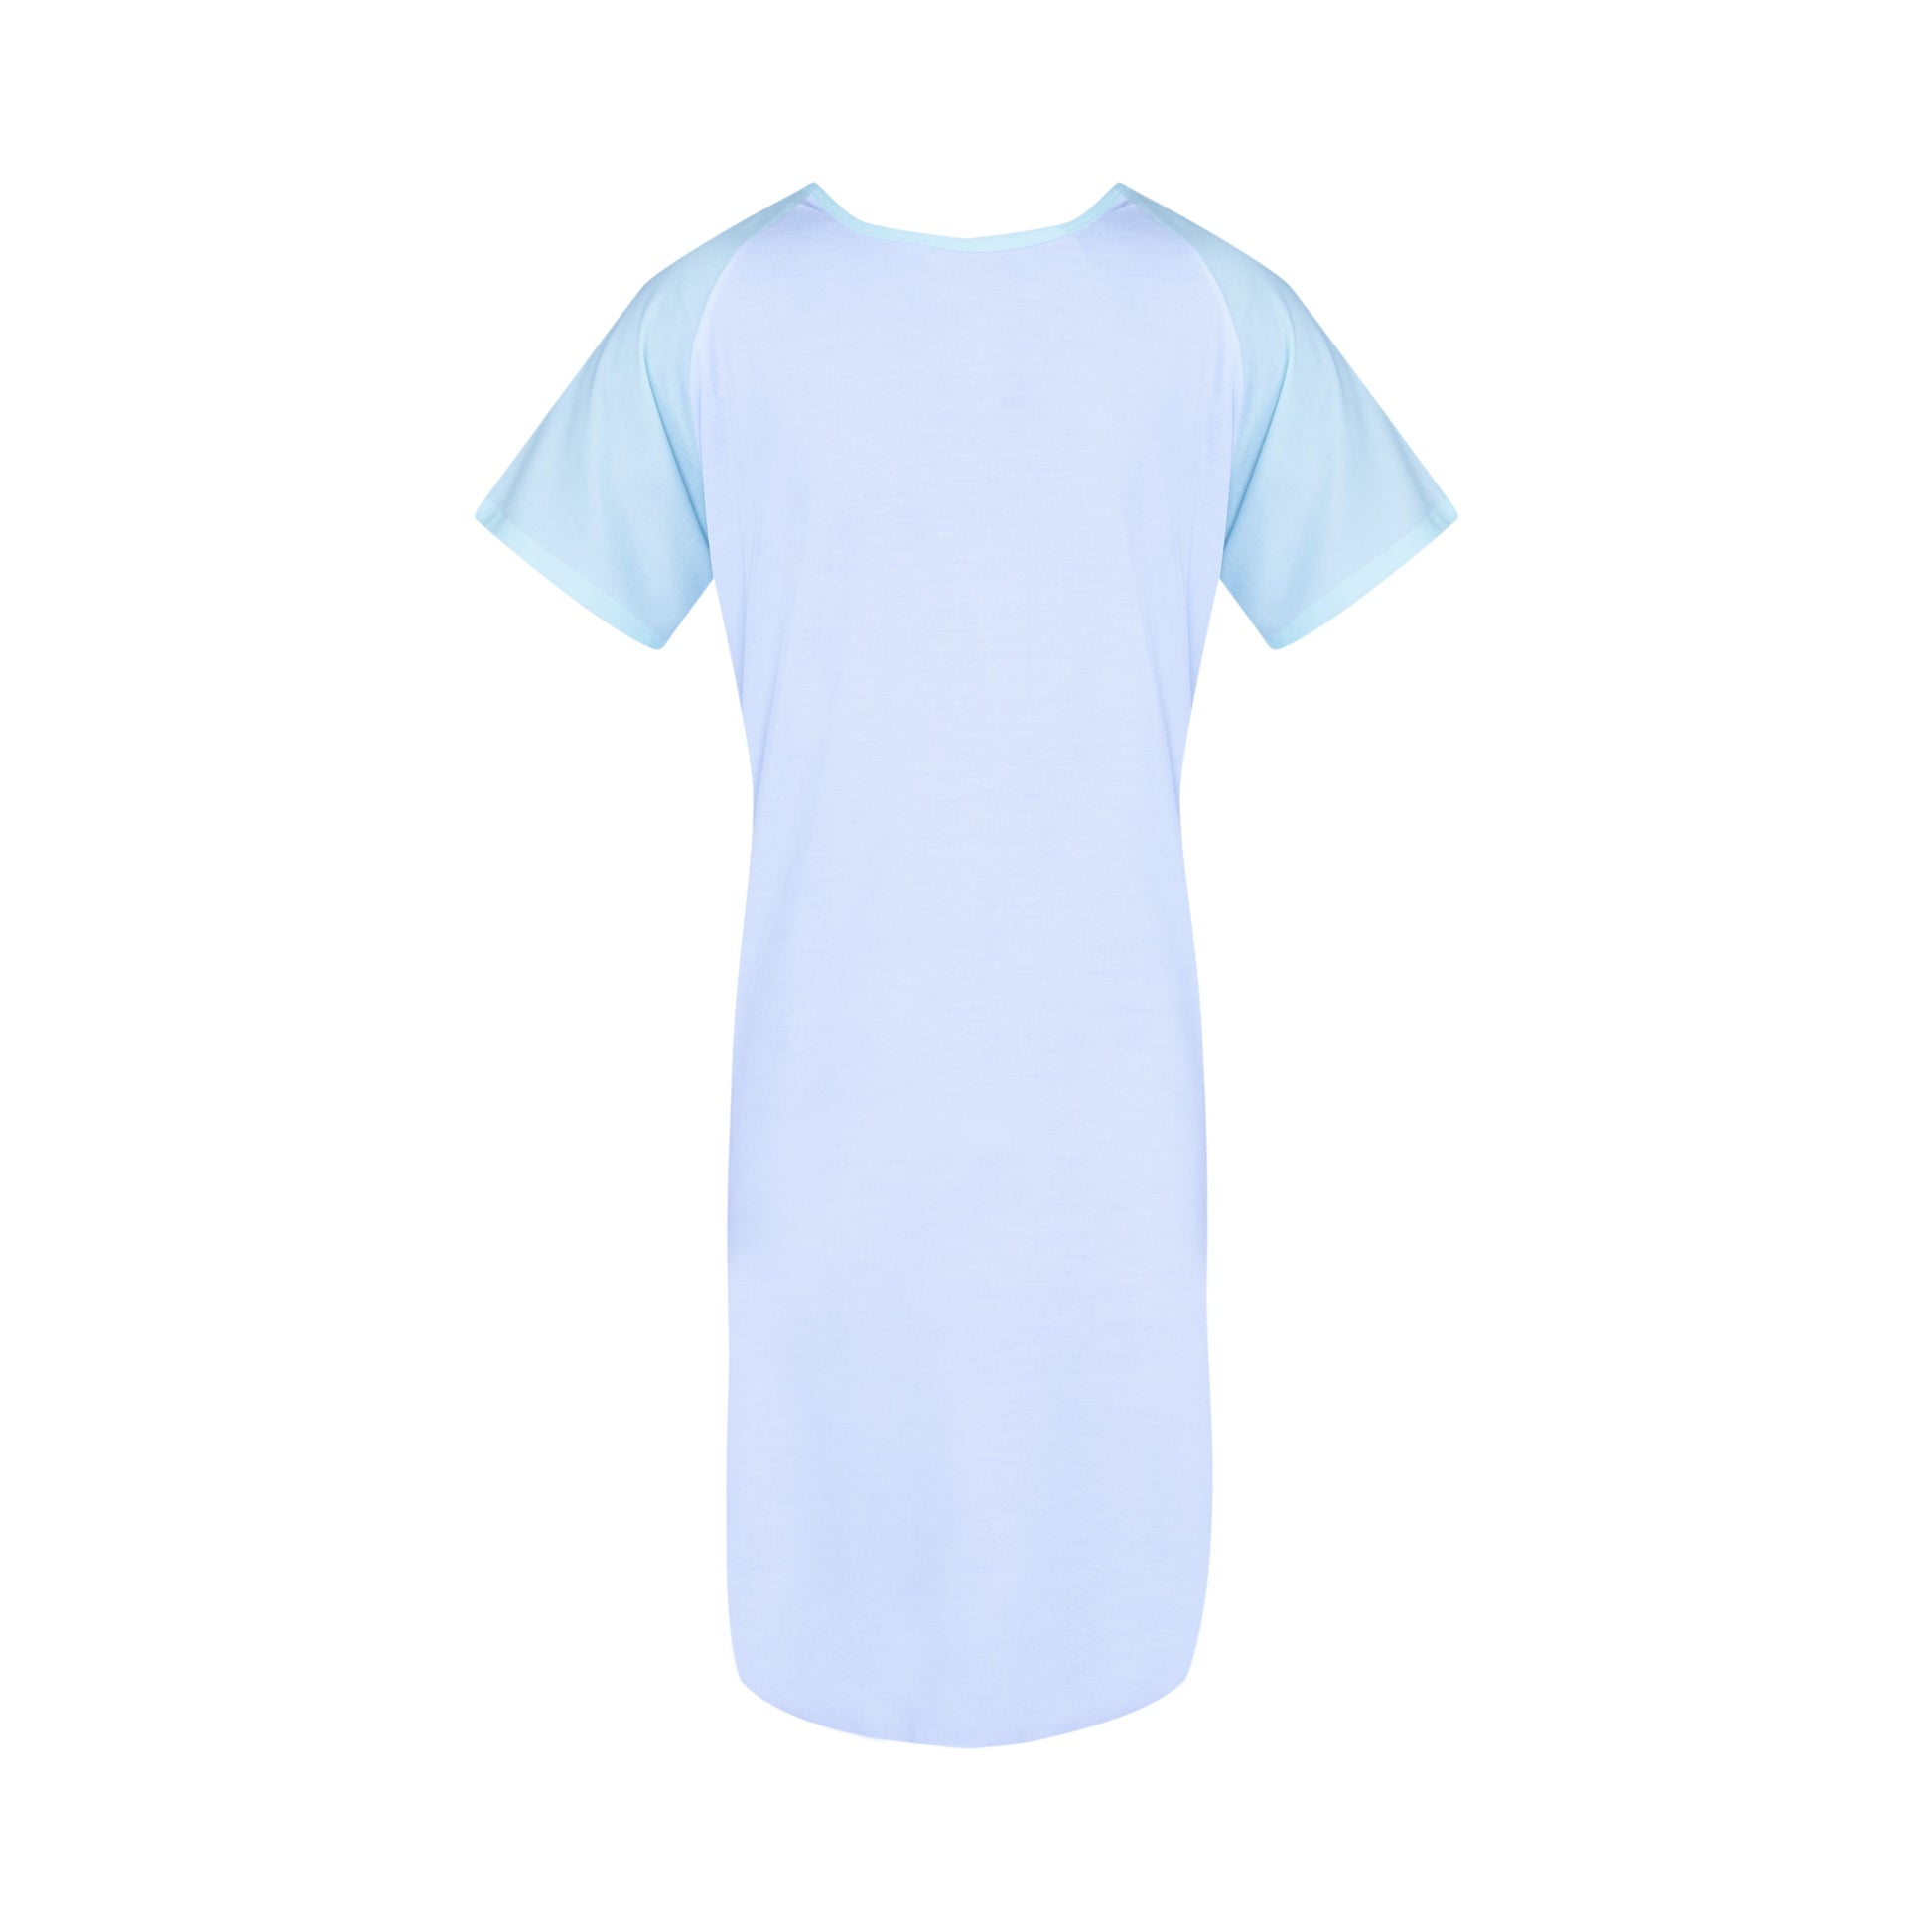 American Dawn | Youth Blue Patient Gown With Short Sleeves And